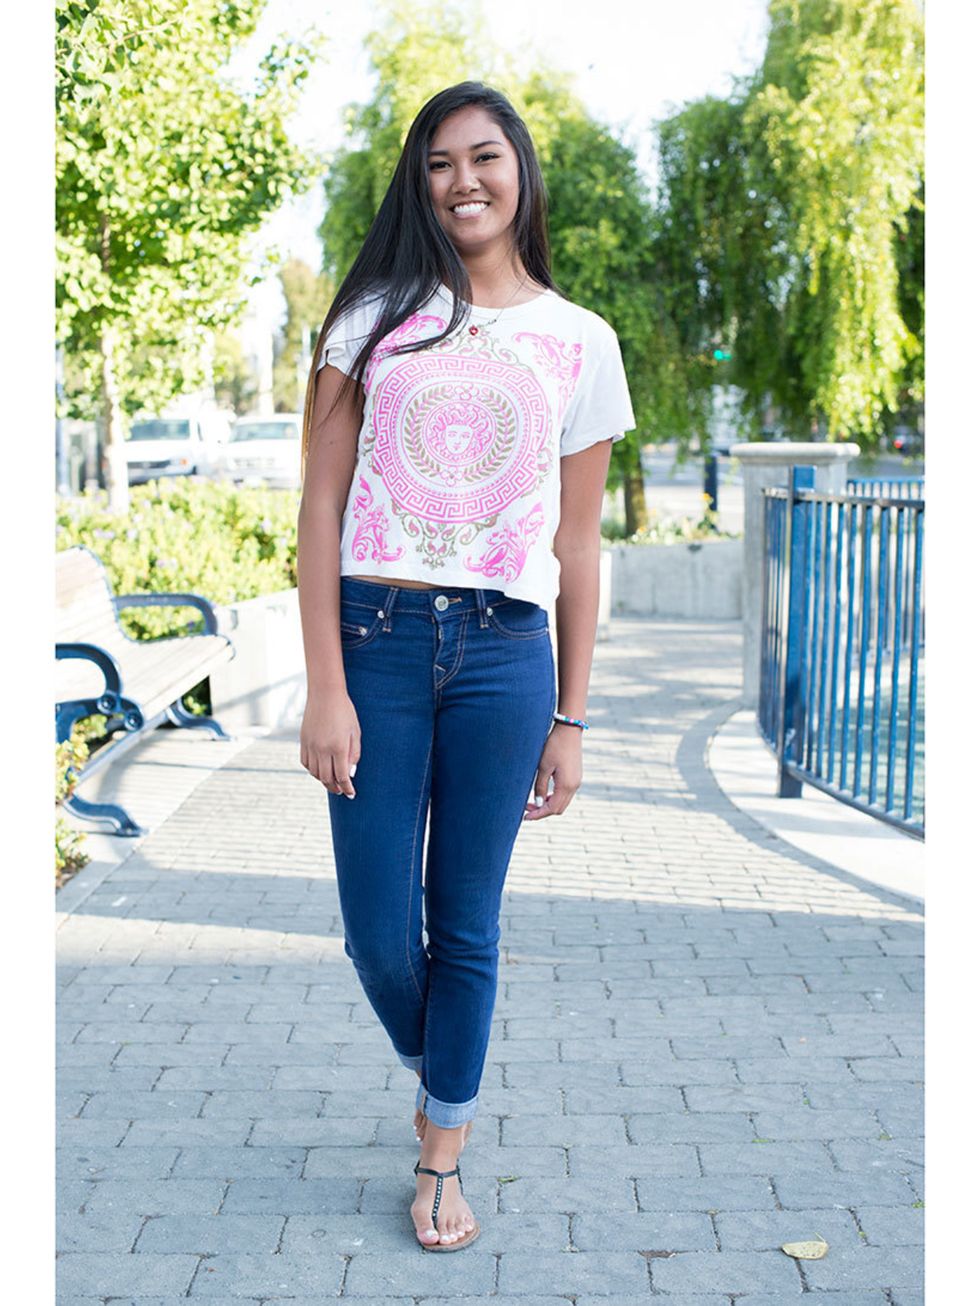 Jessica Baldovino wears Forever 21 t shirt, True Religion jeans and American Eagle shoes.